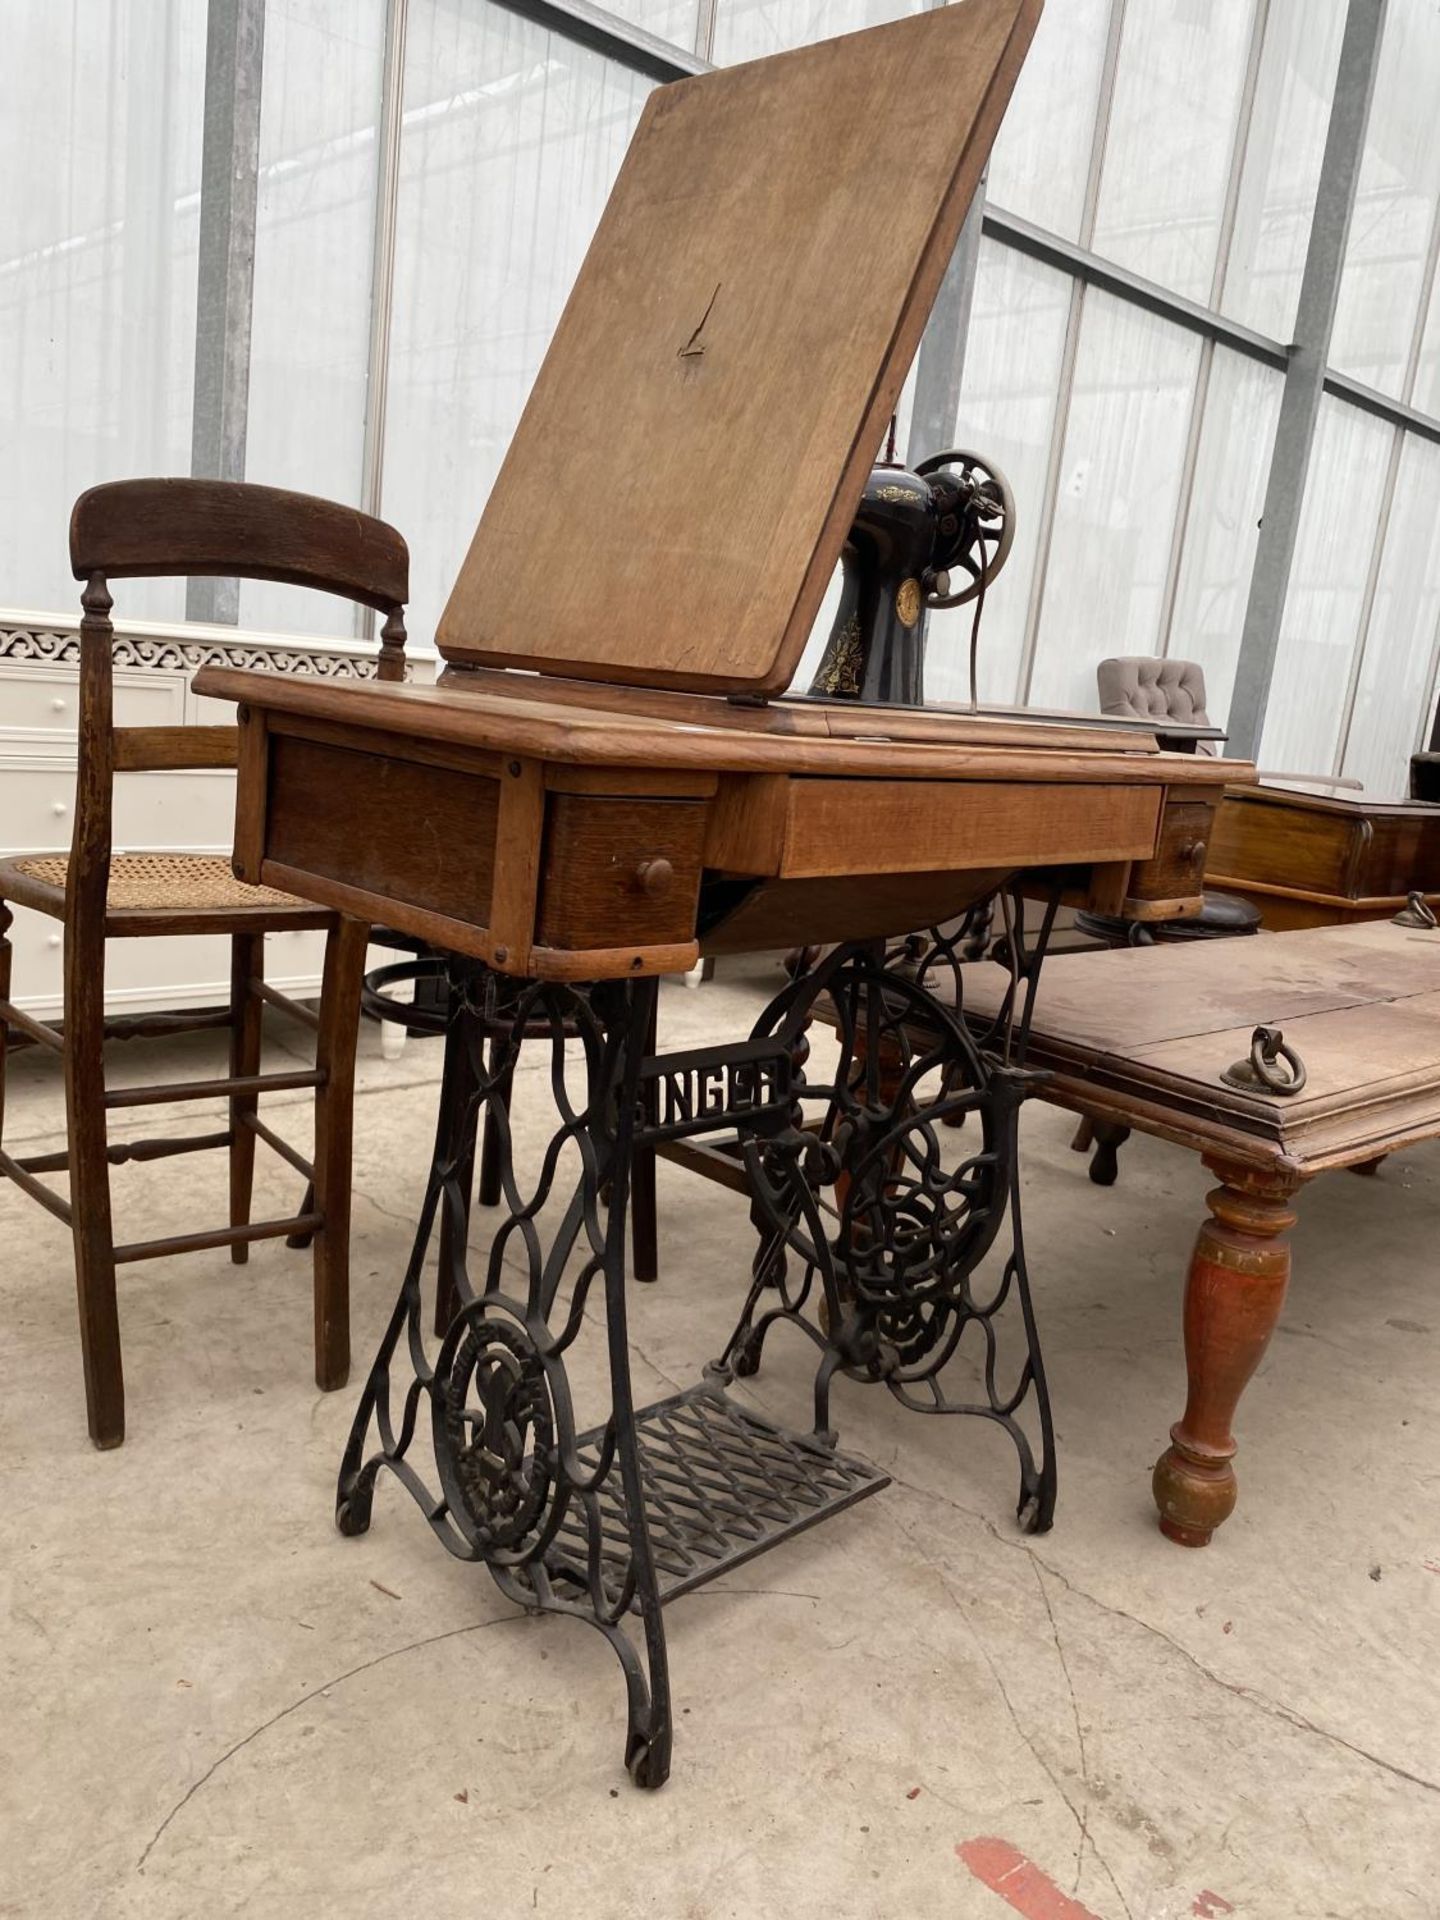 A SINGER TREADLE SEWING MACHINE - Image 3 of 5